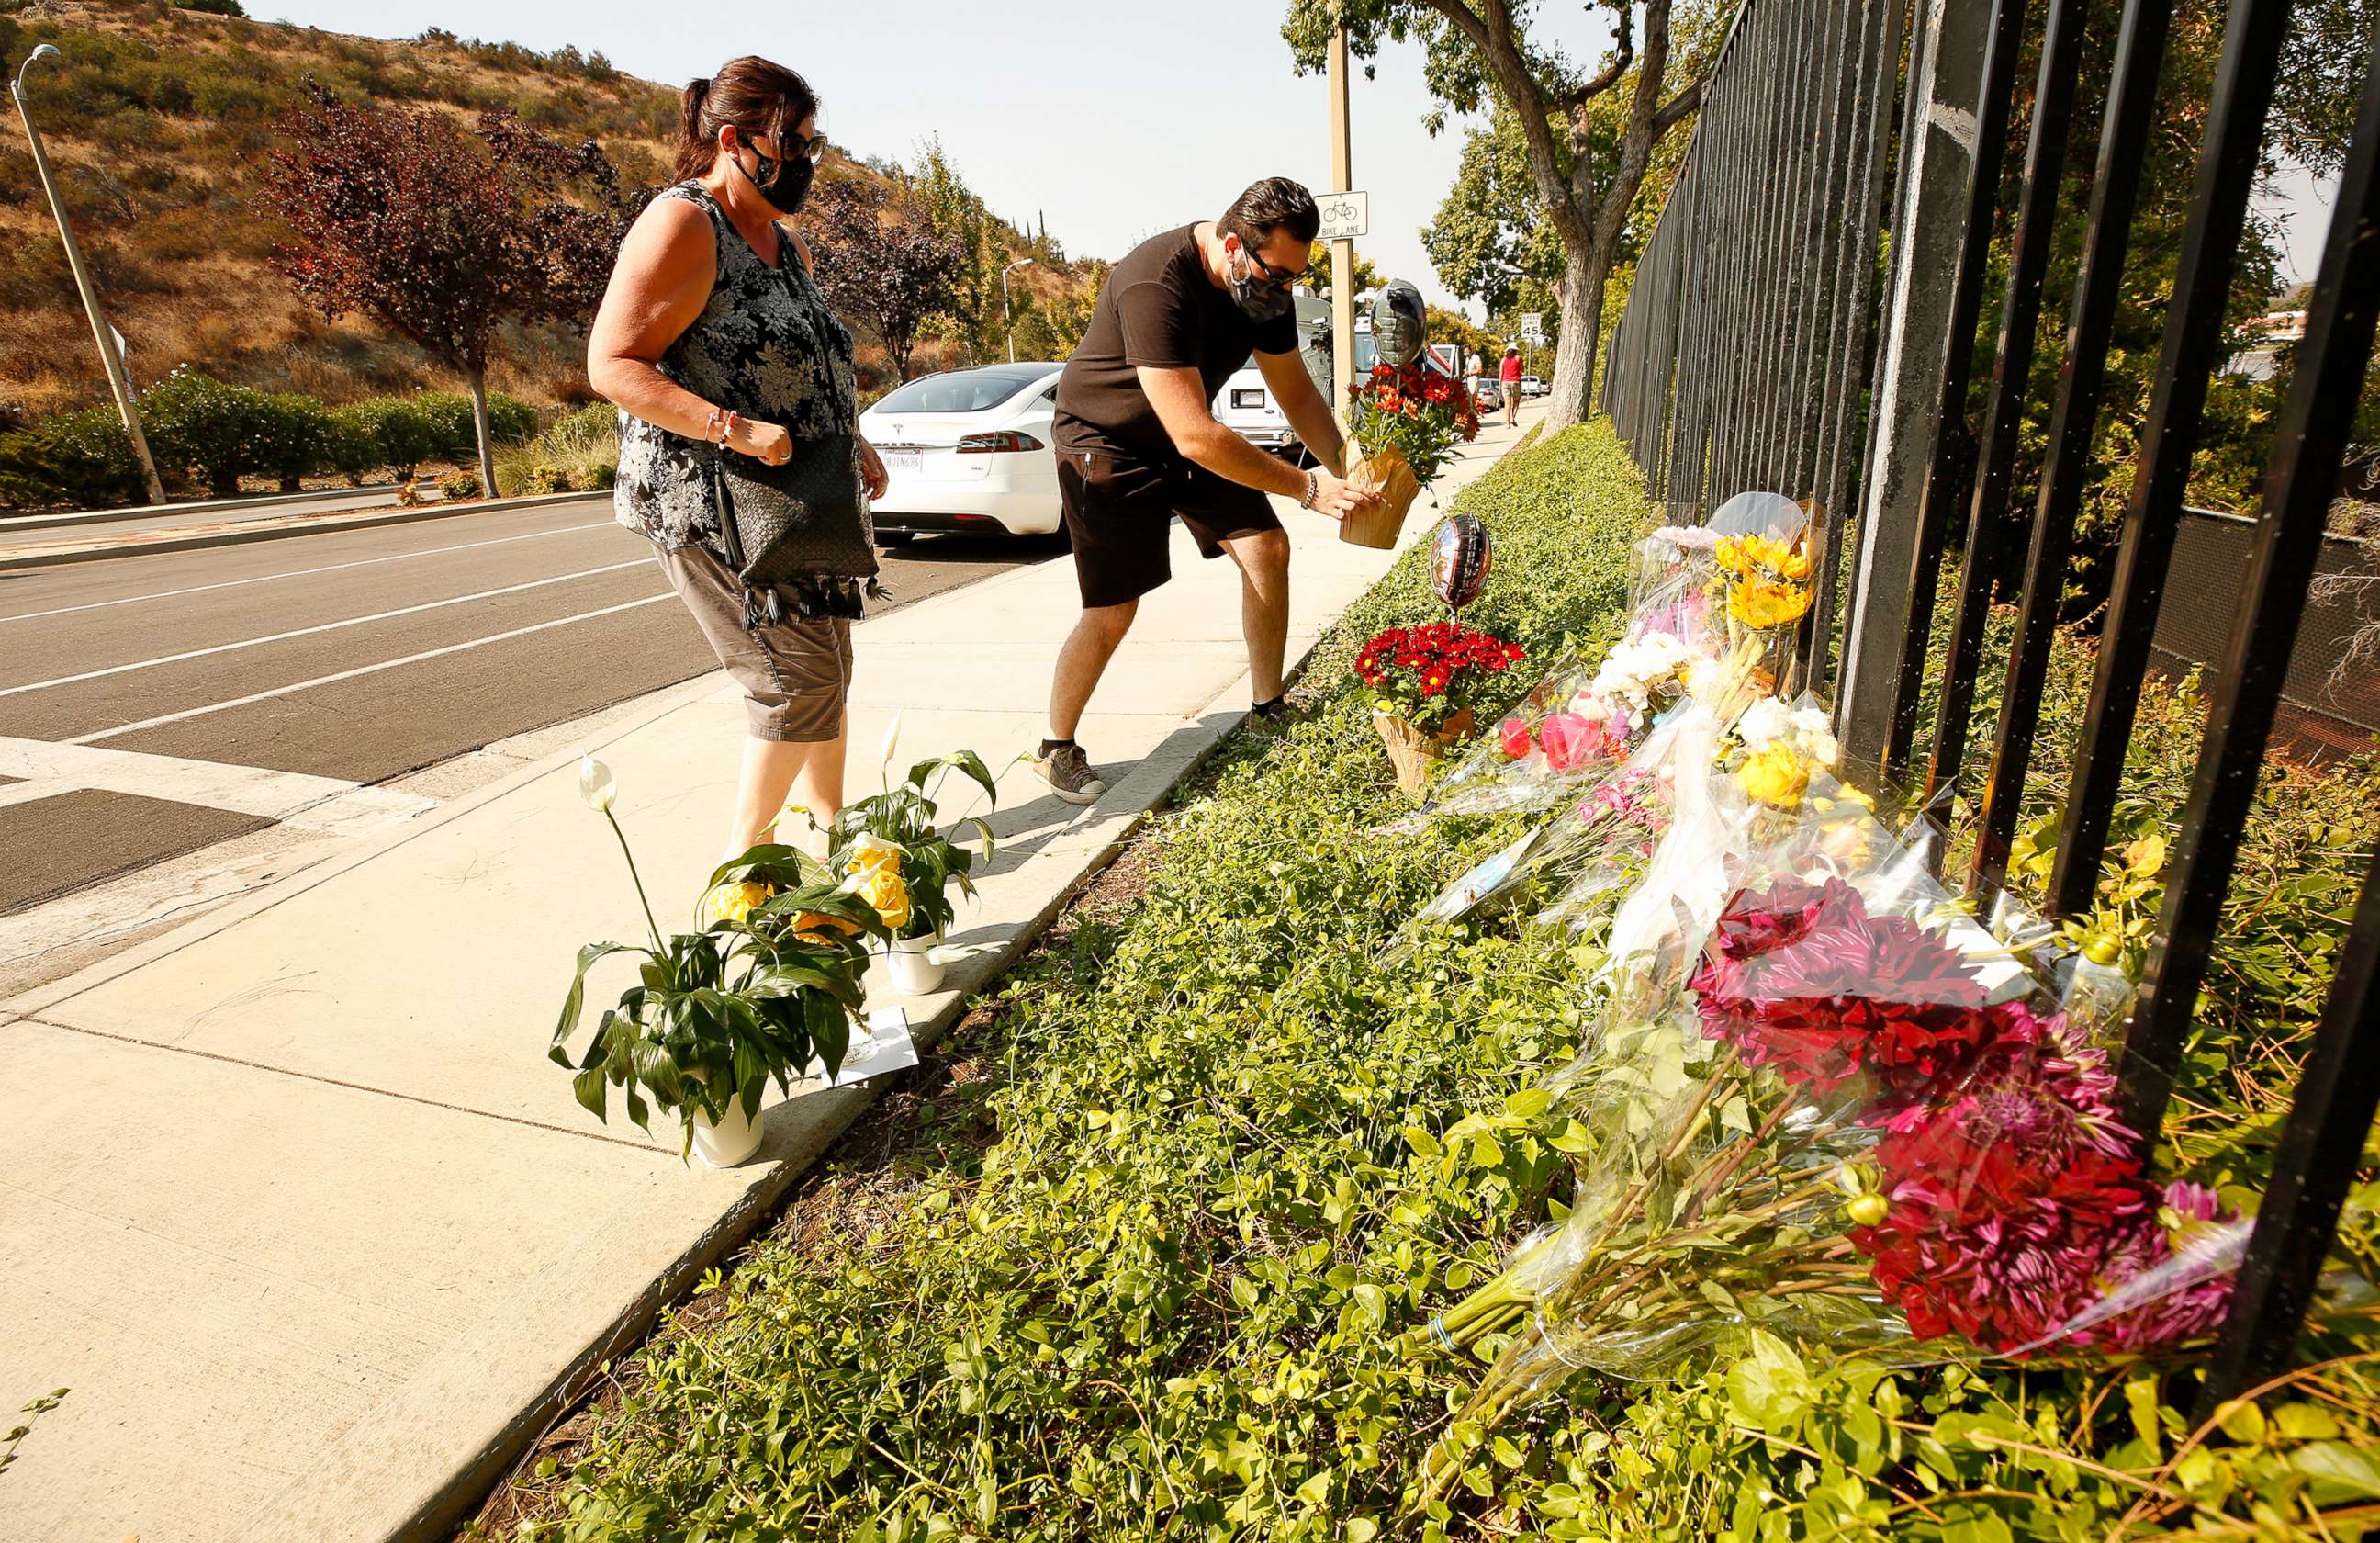 PHOTO: Lorraine Maralian and her son Anthony Maralian of Westlake Village place flowers and pray at a growing memorial for two brothers who were fatally injured while crossing  Triunfo Canyon Road, Westlake Village, Calif., Sept. 30, 2020.